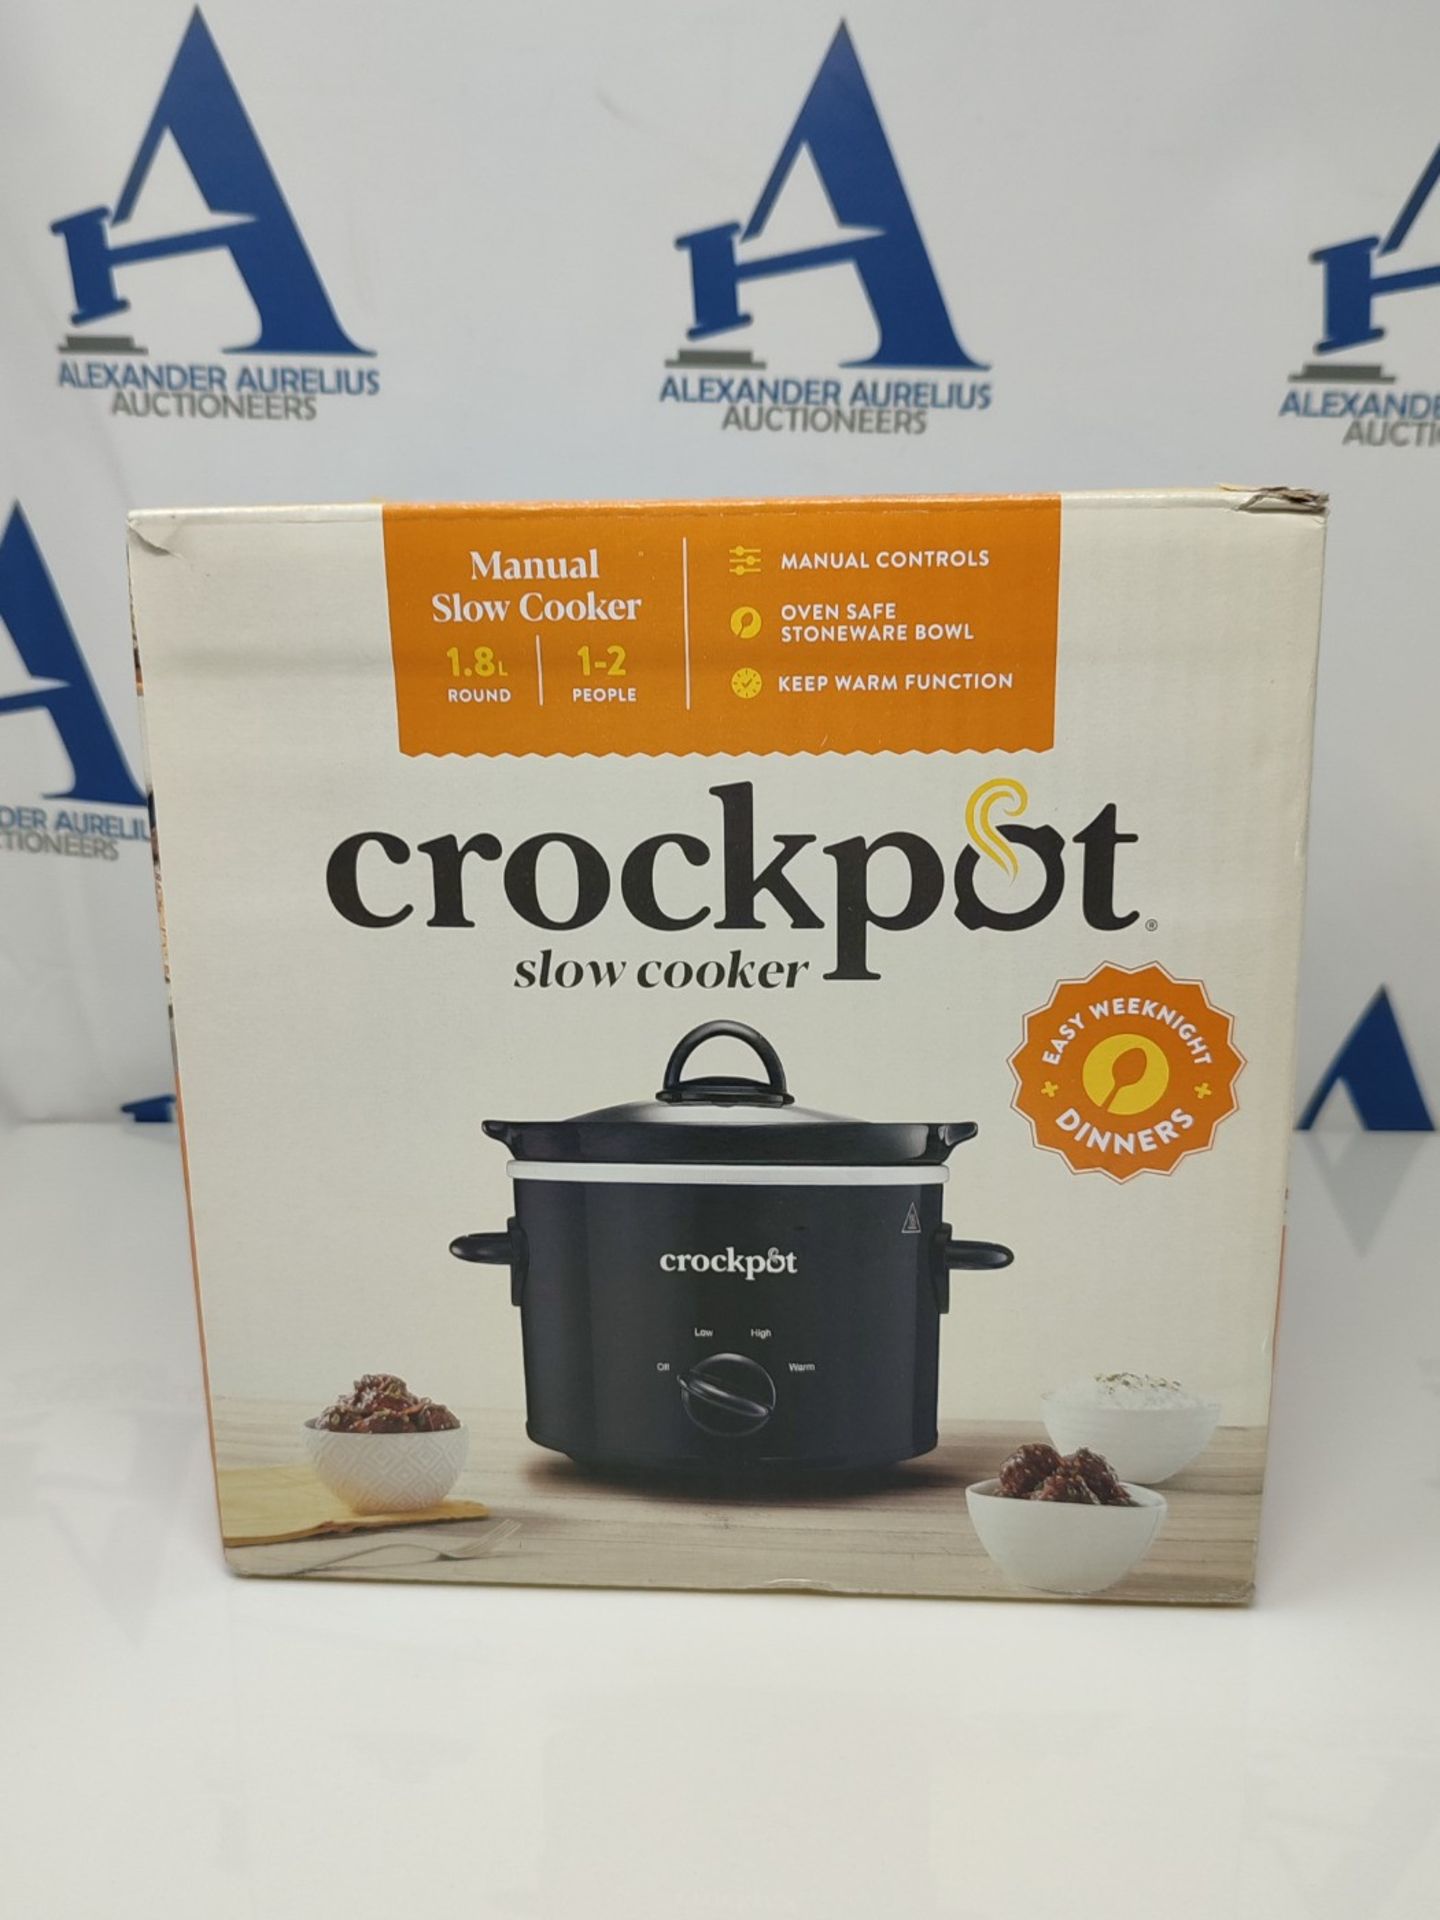 Crockpot Slow Cooker | Removable Easy-Clean Ceramic Bowl | 1.8 L Small Slow Cooker (Se - Image 2 of 3